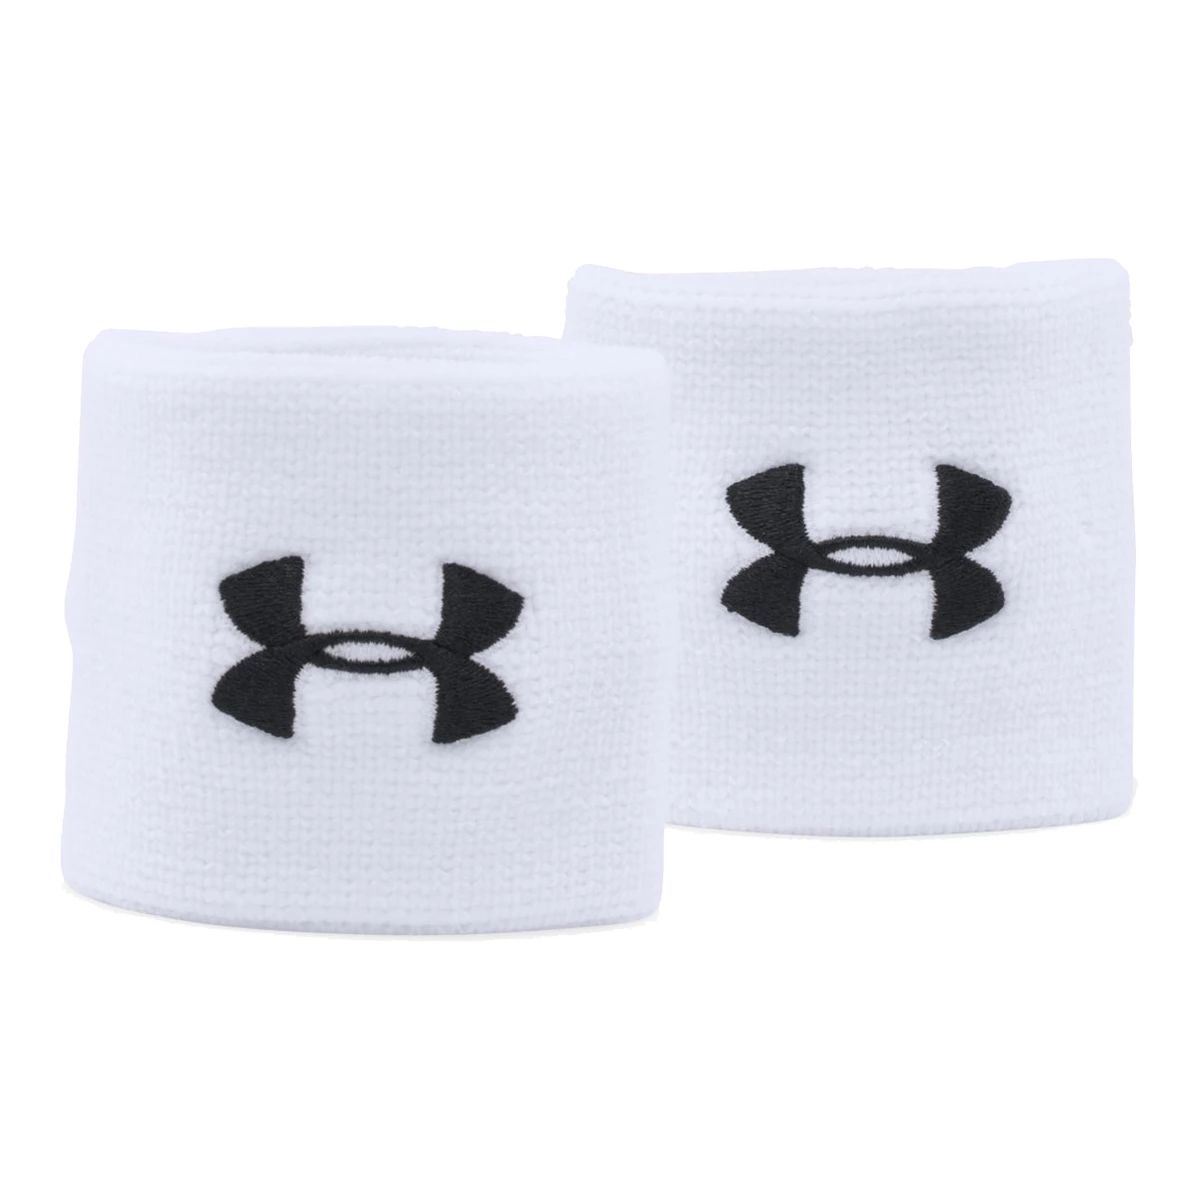 Under Armour 3 Inch Performance Wristband